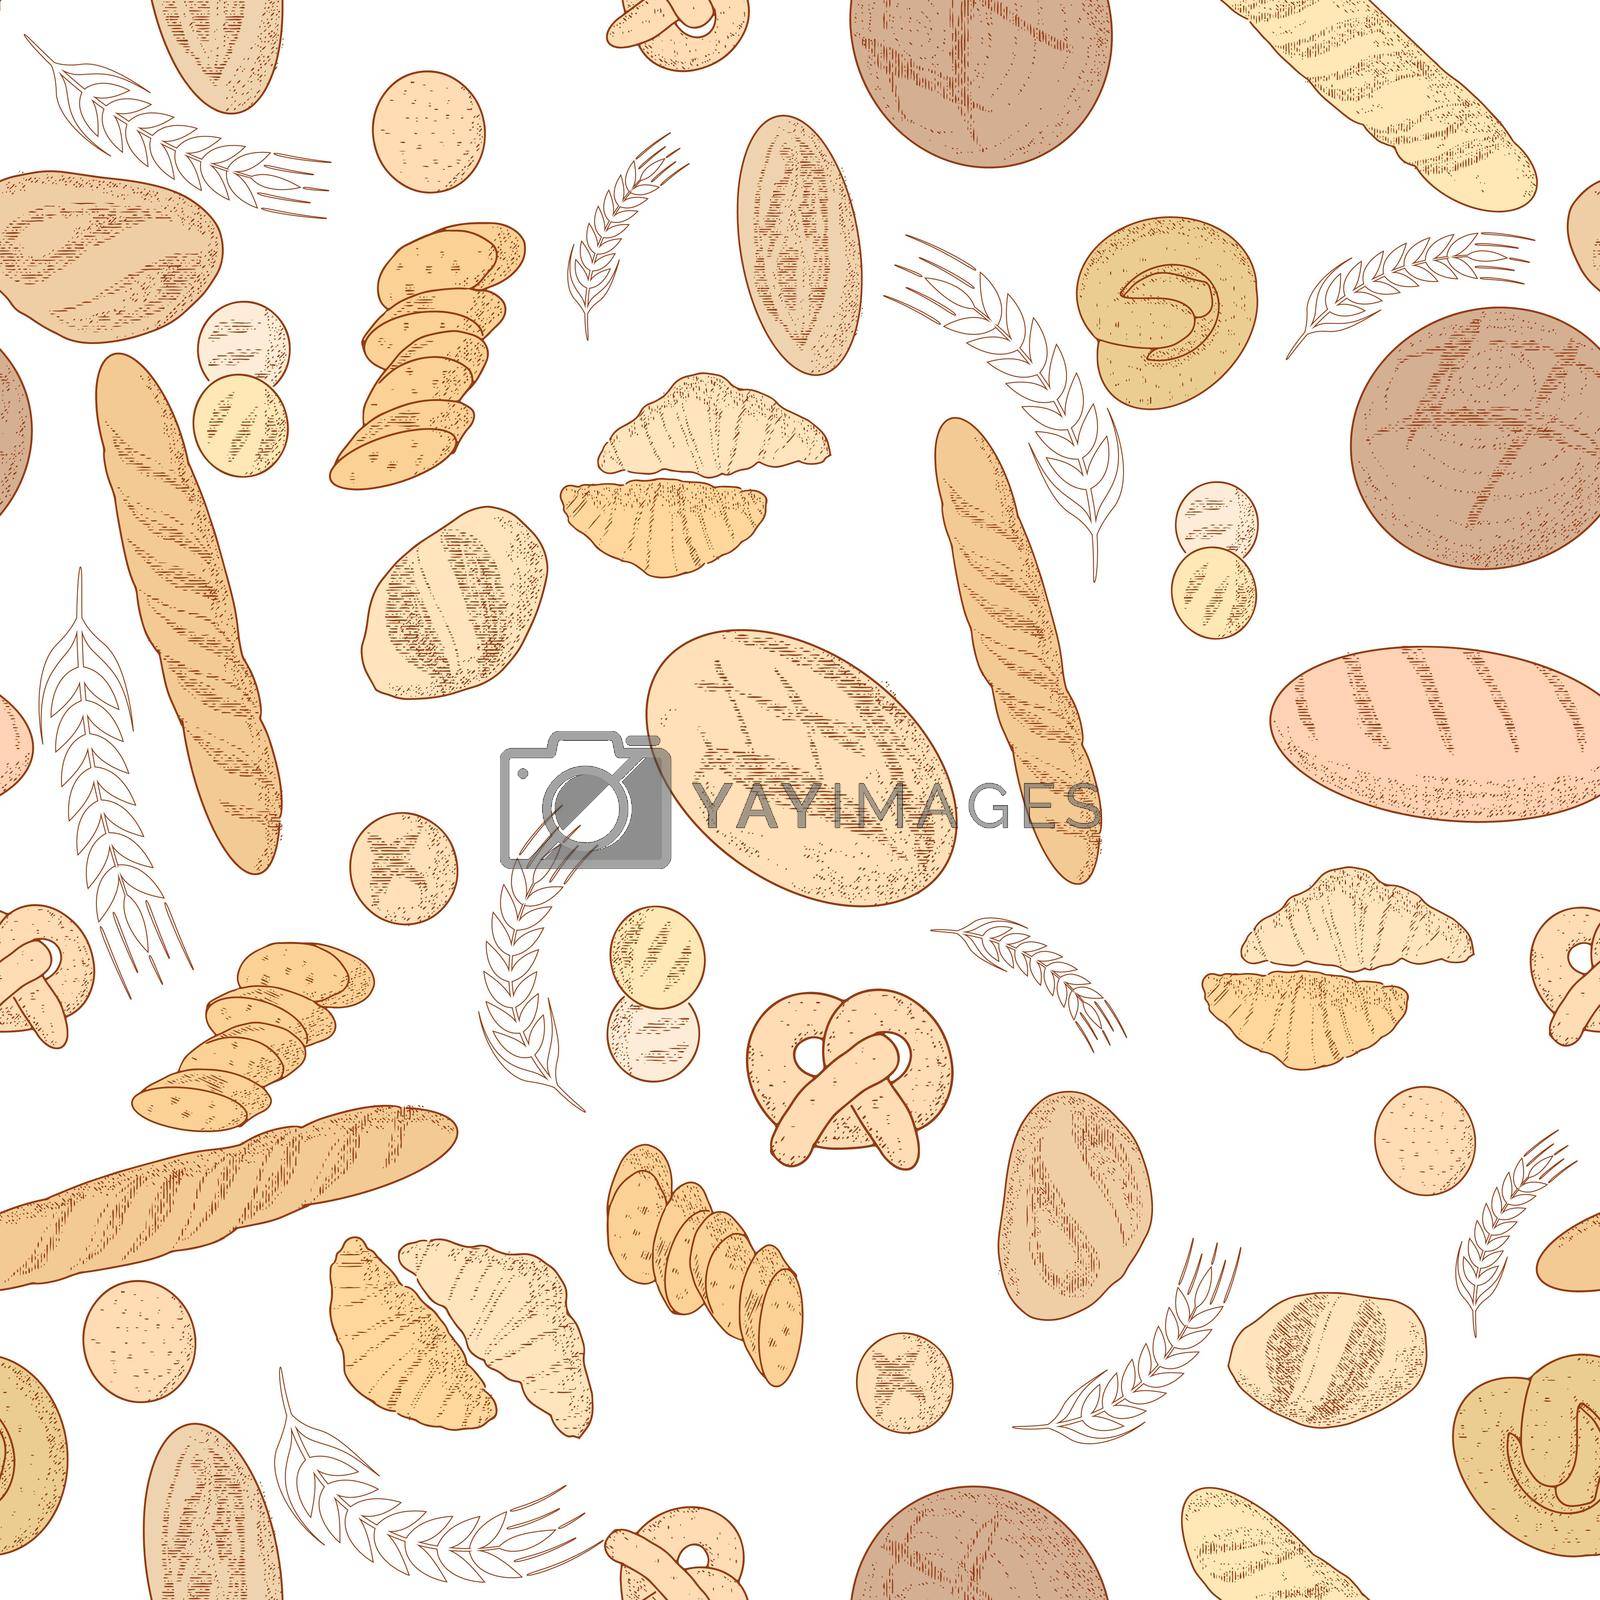 Royalty free image of A set of grunge illustrations of bread. by GALA_art